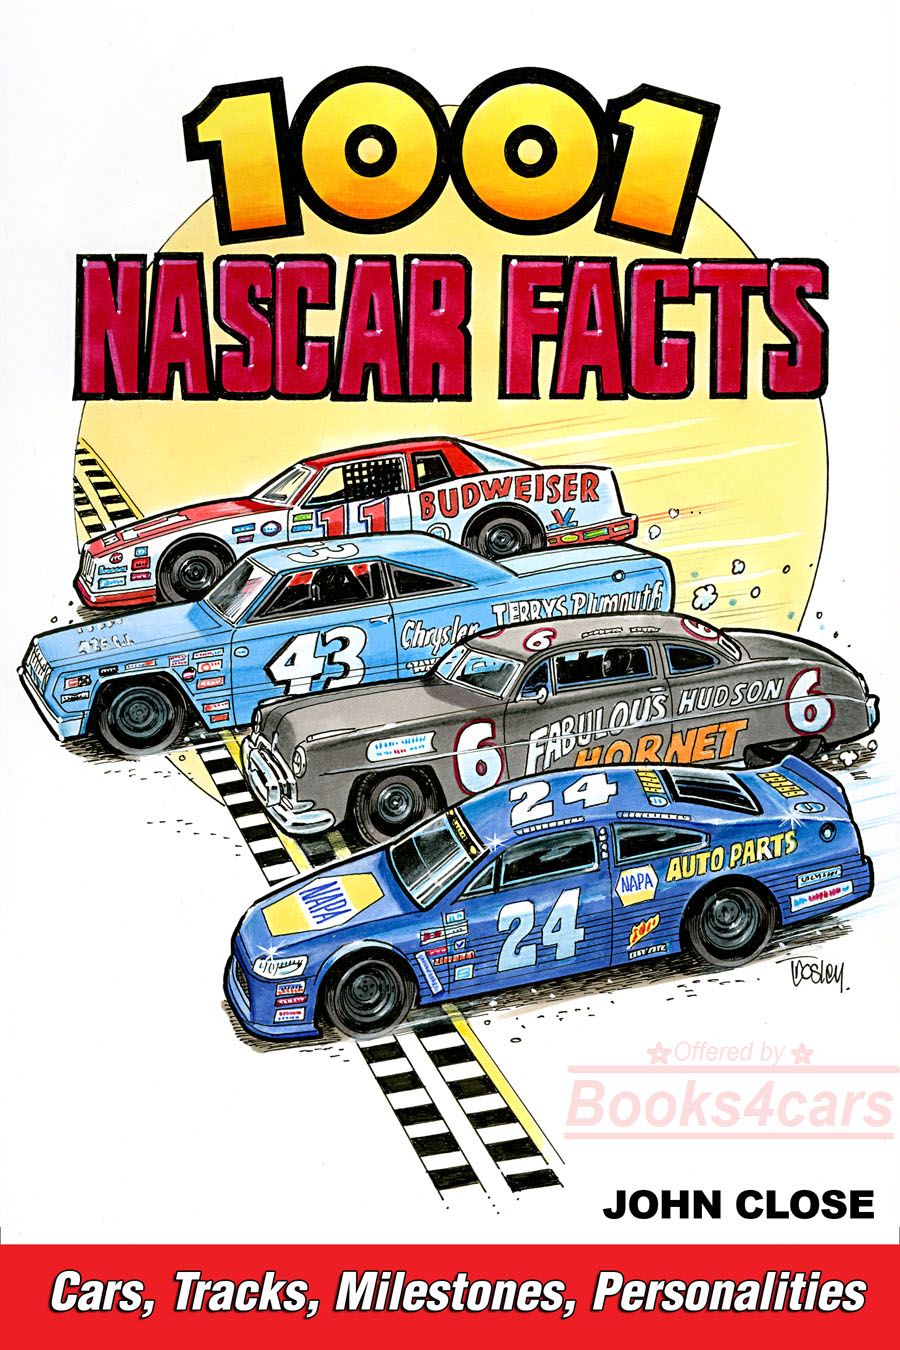 1001 NASCAR Facts Cars Tracks Milestones Racing Personalities by J. Close 376 pgs with over 120 photos